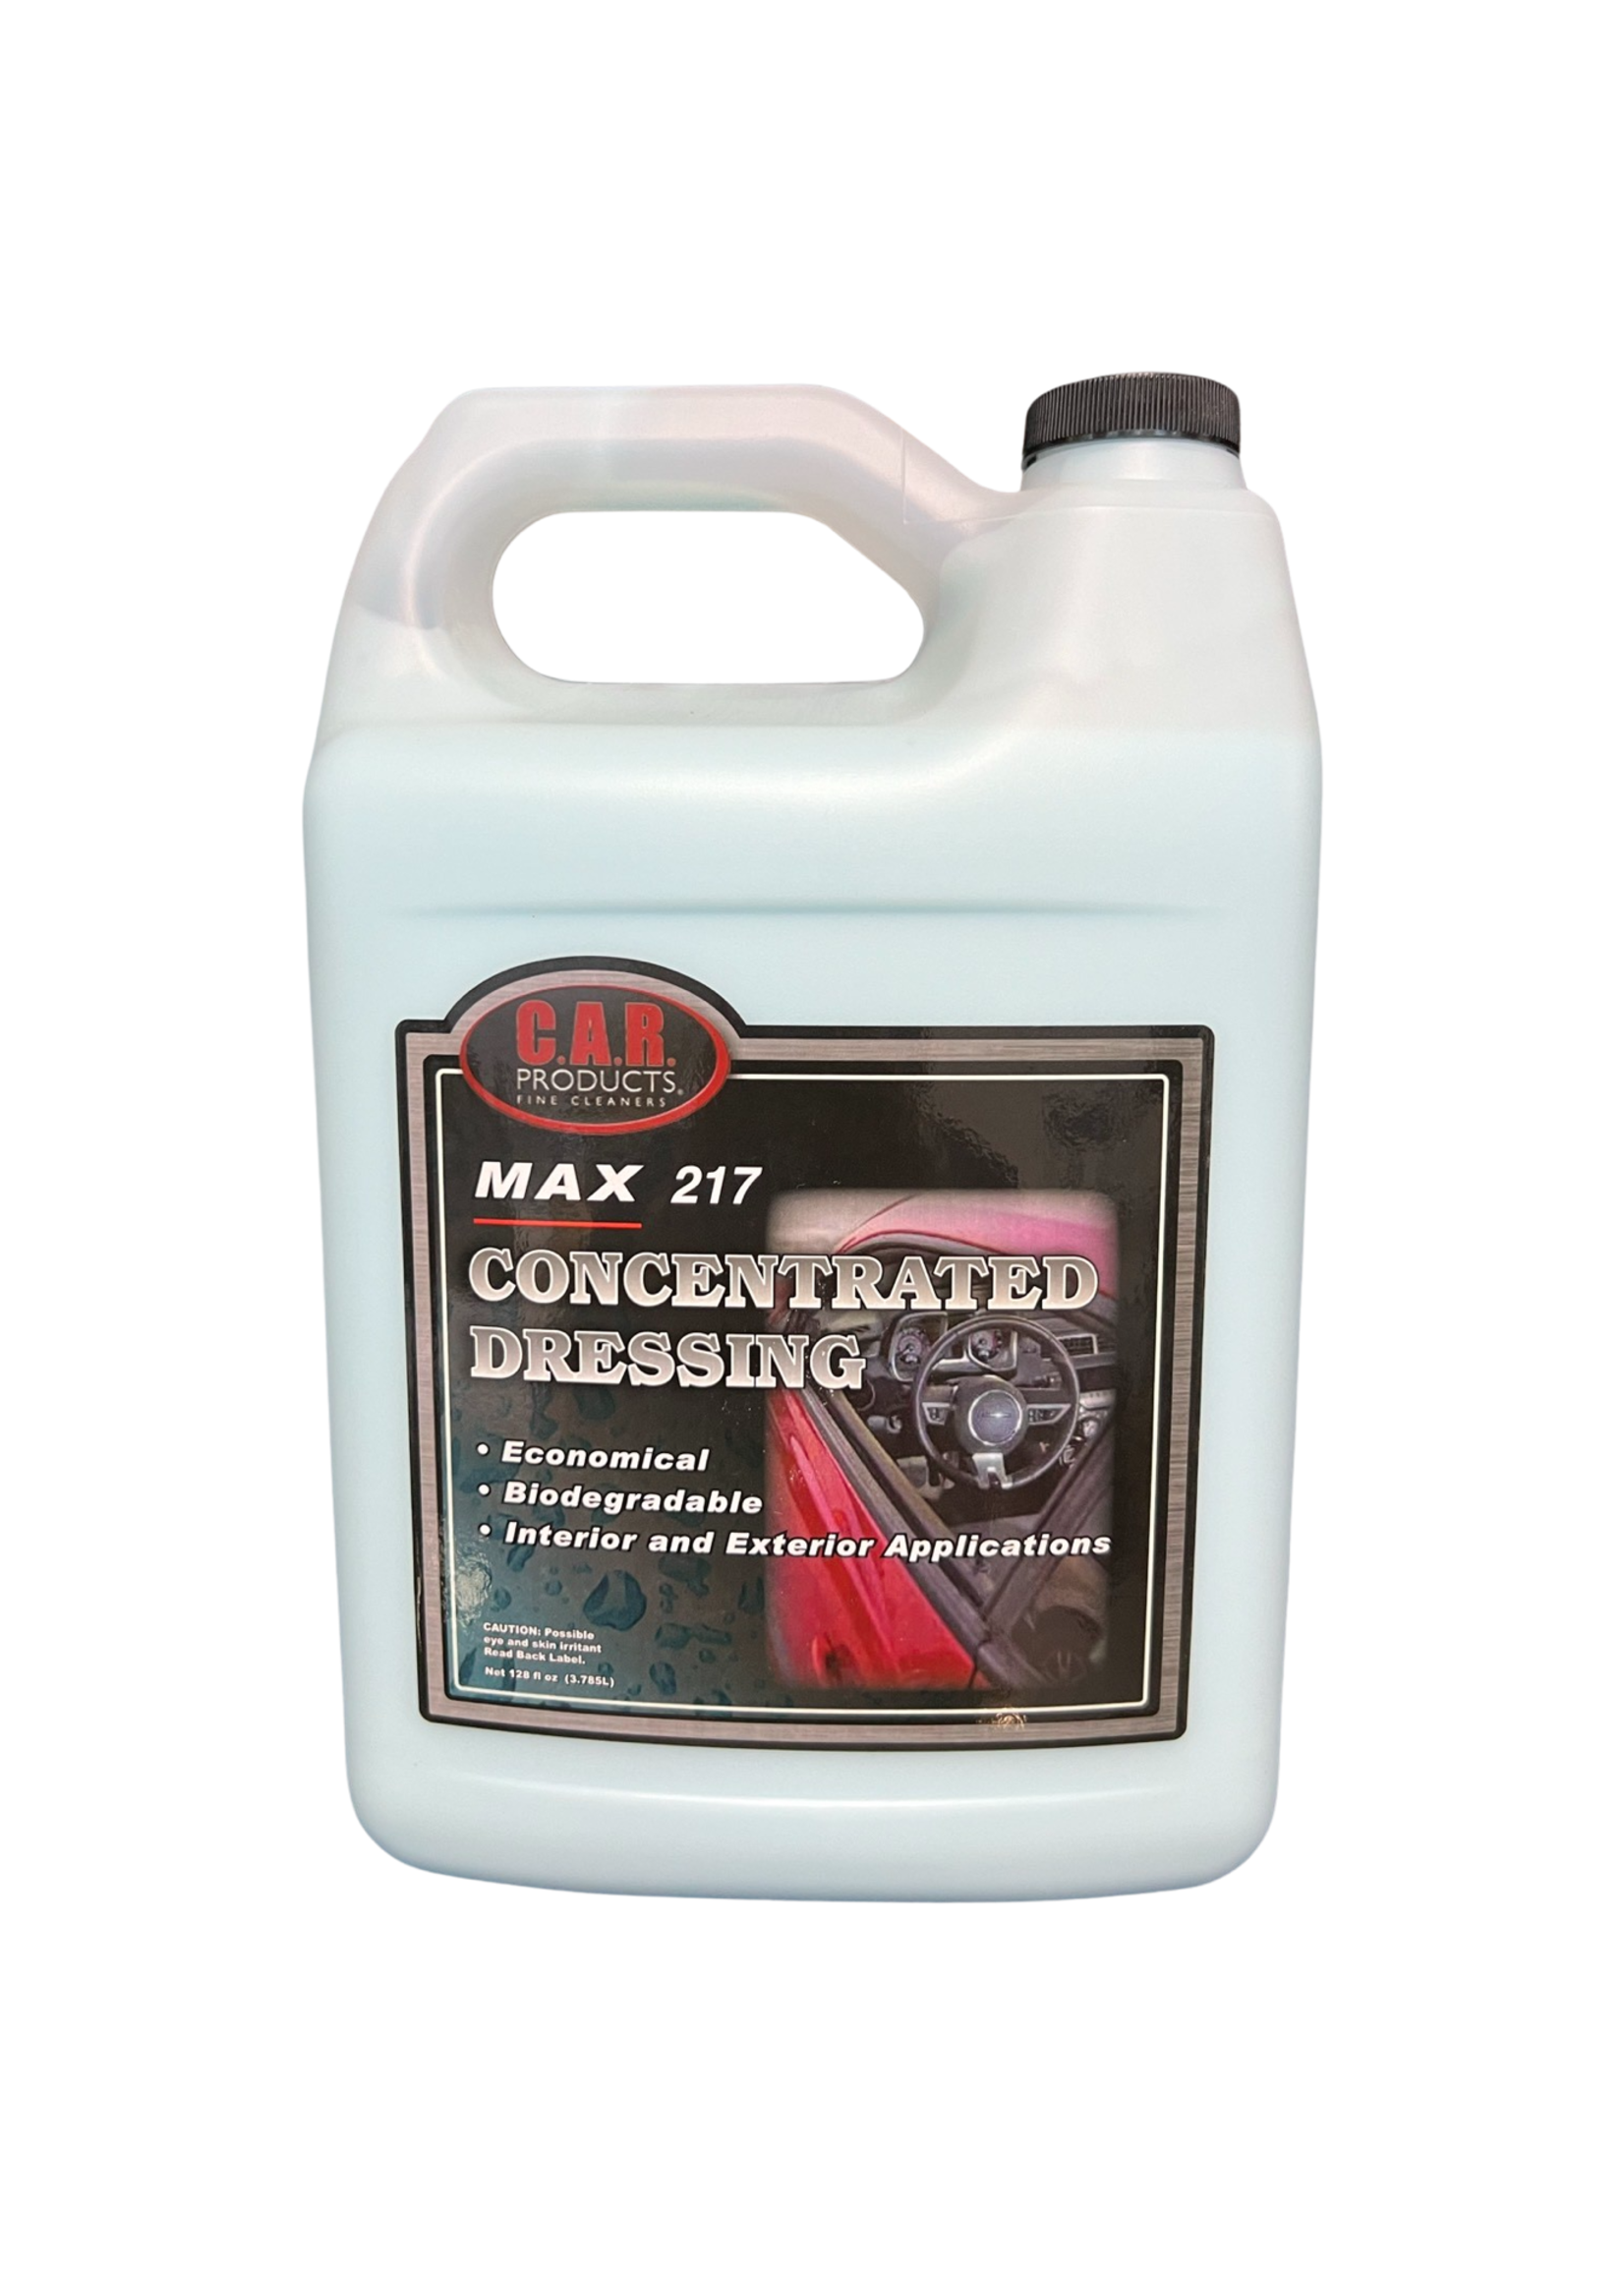 CAR Products Max Concentrated Dressing